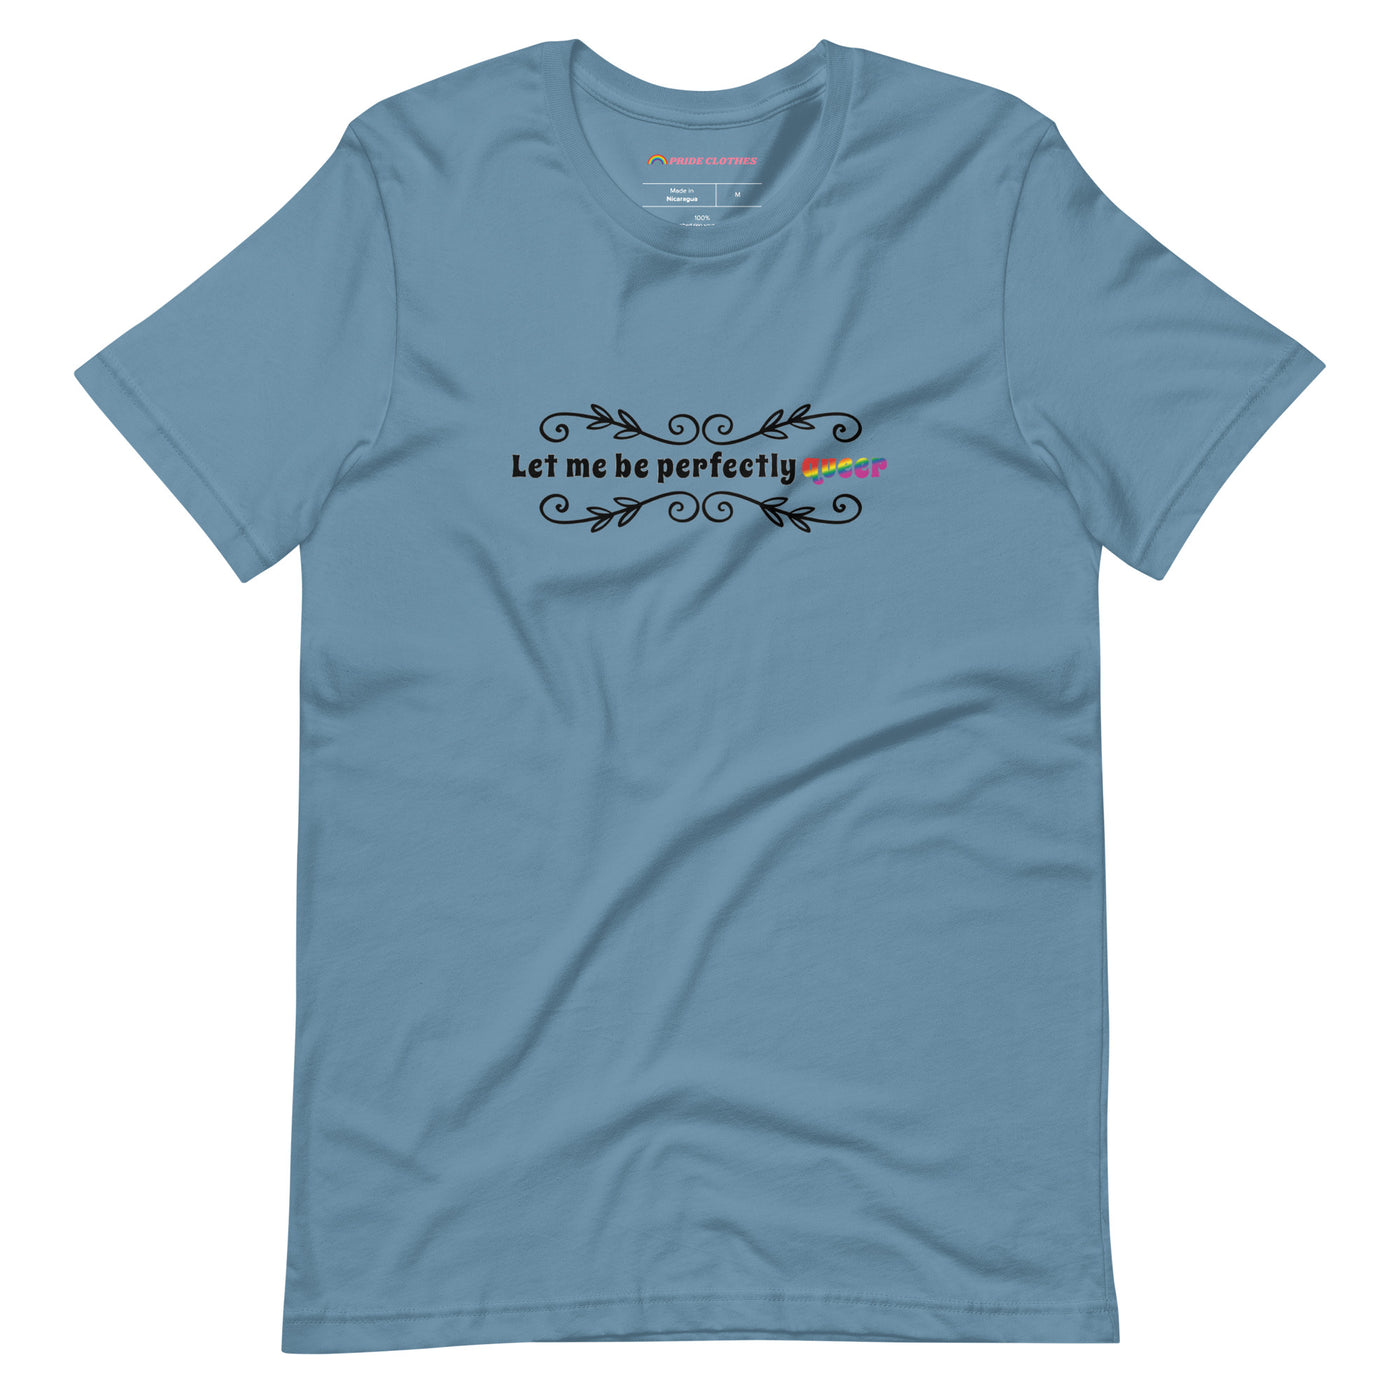 Pride Clothes - Leave No Assumptions Let Me Be Perfectly Queer T-Shirt - Steel Blue